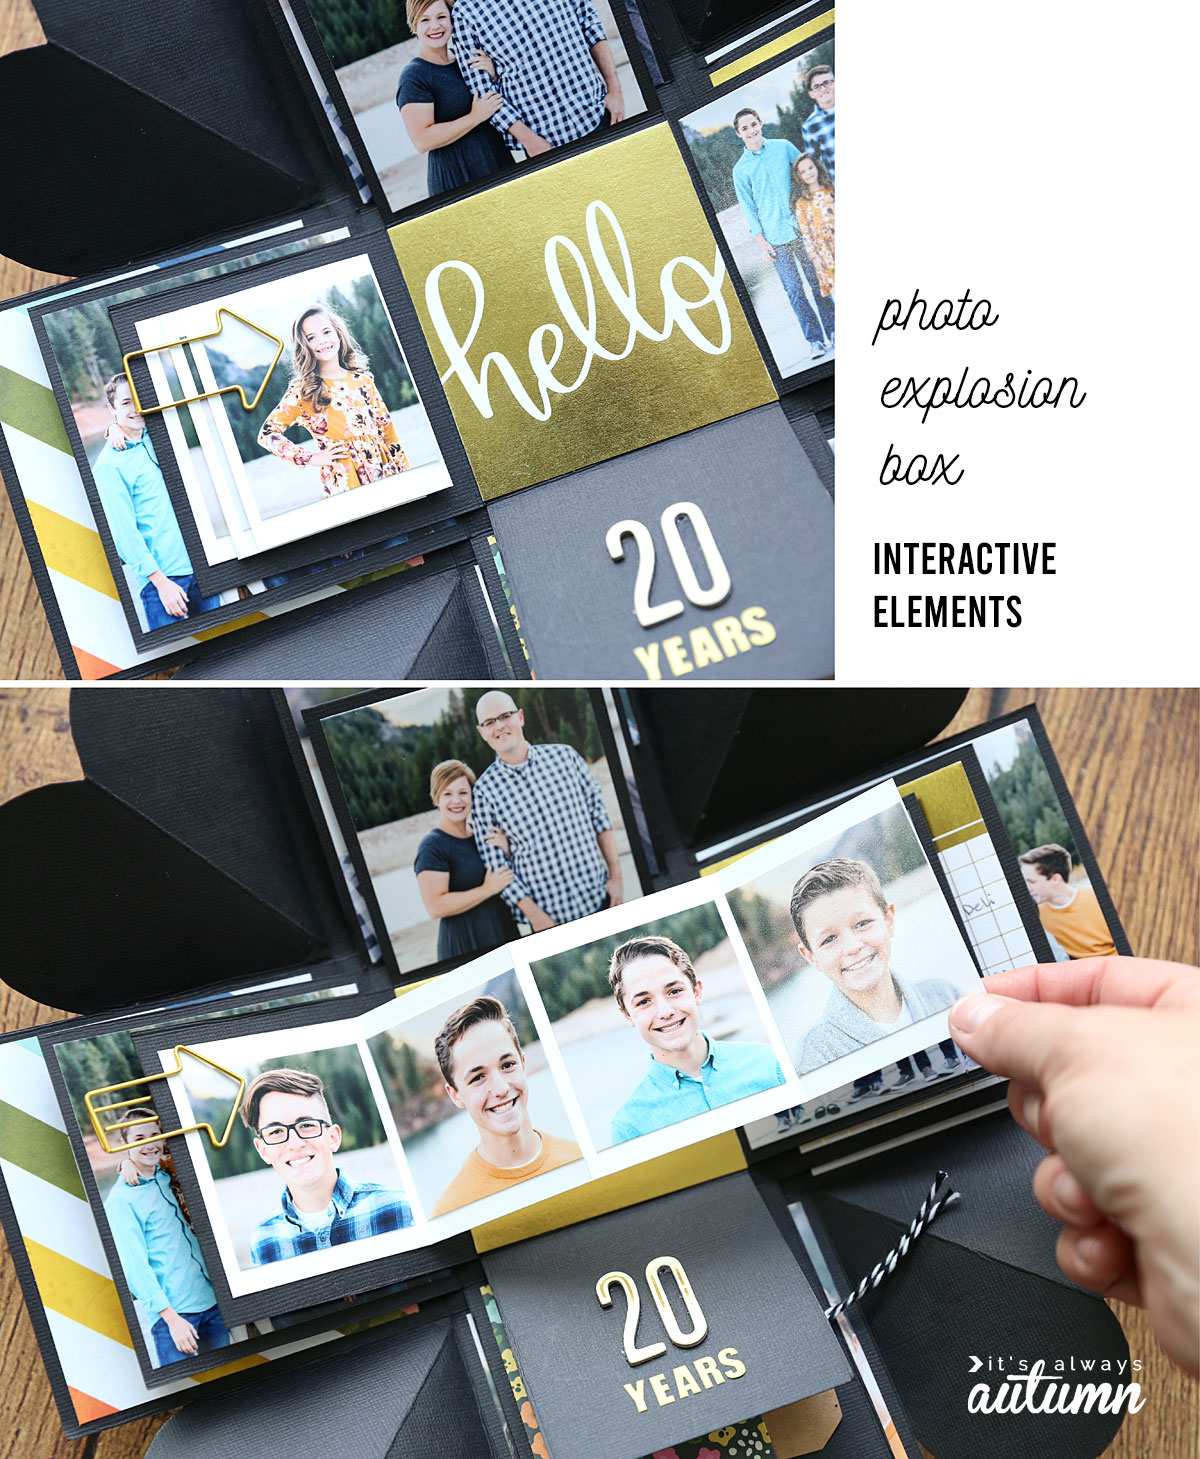 DIY photo explosion box that opens up when you take the lid off